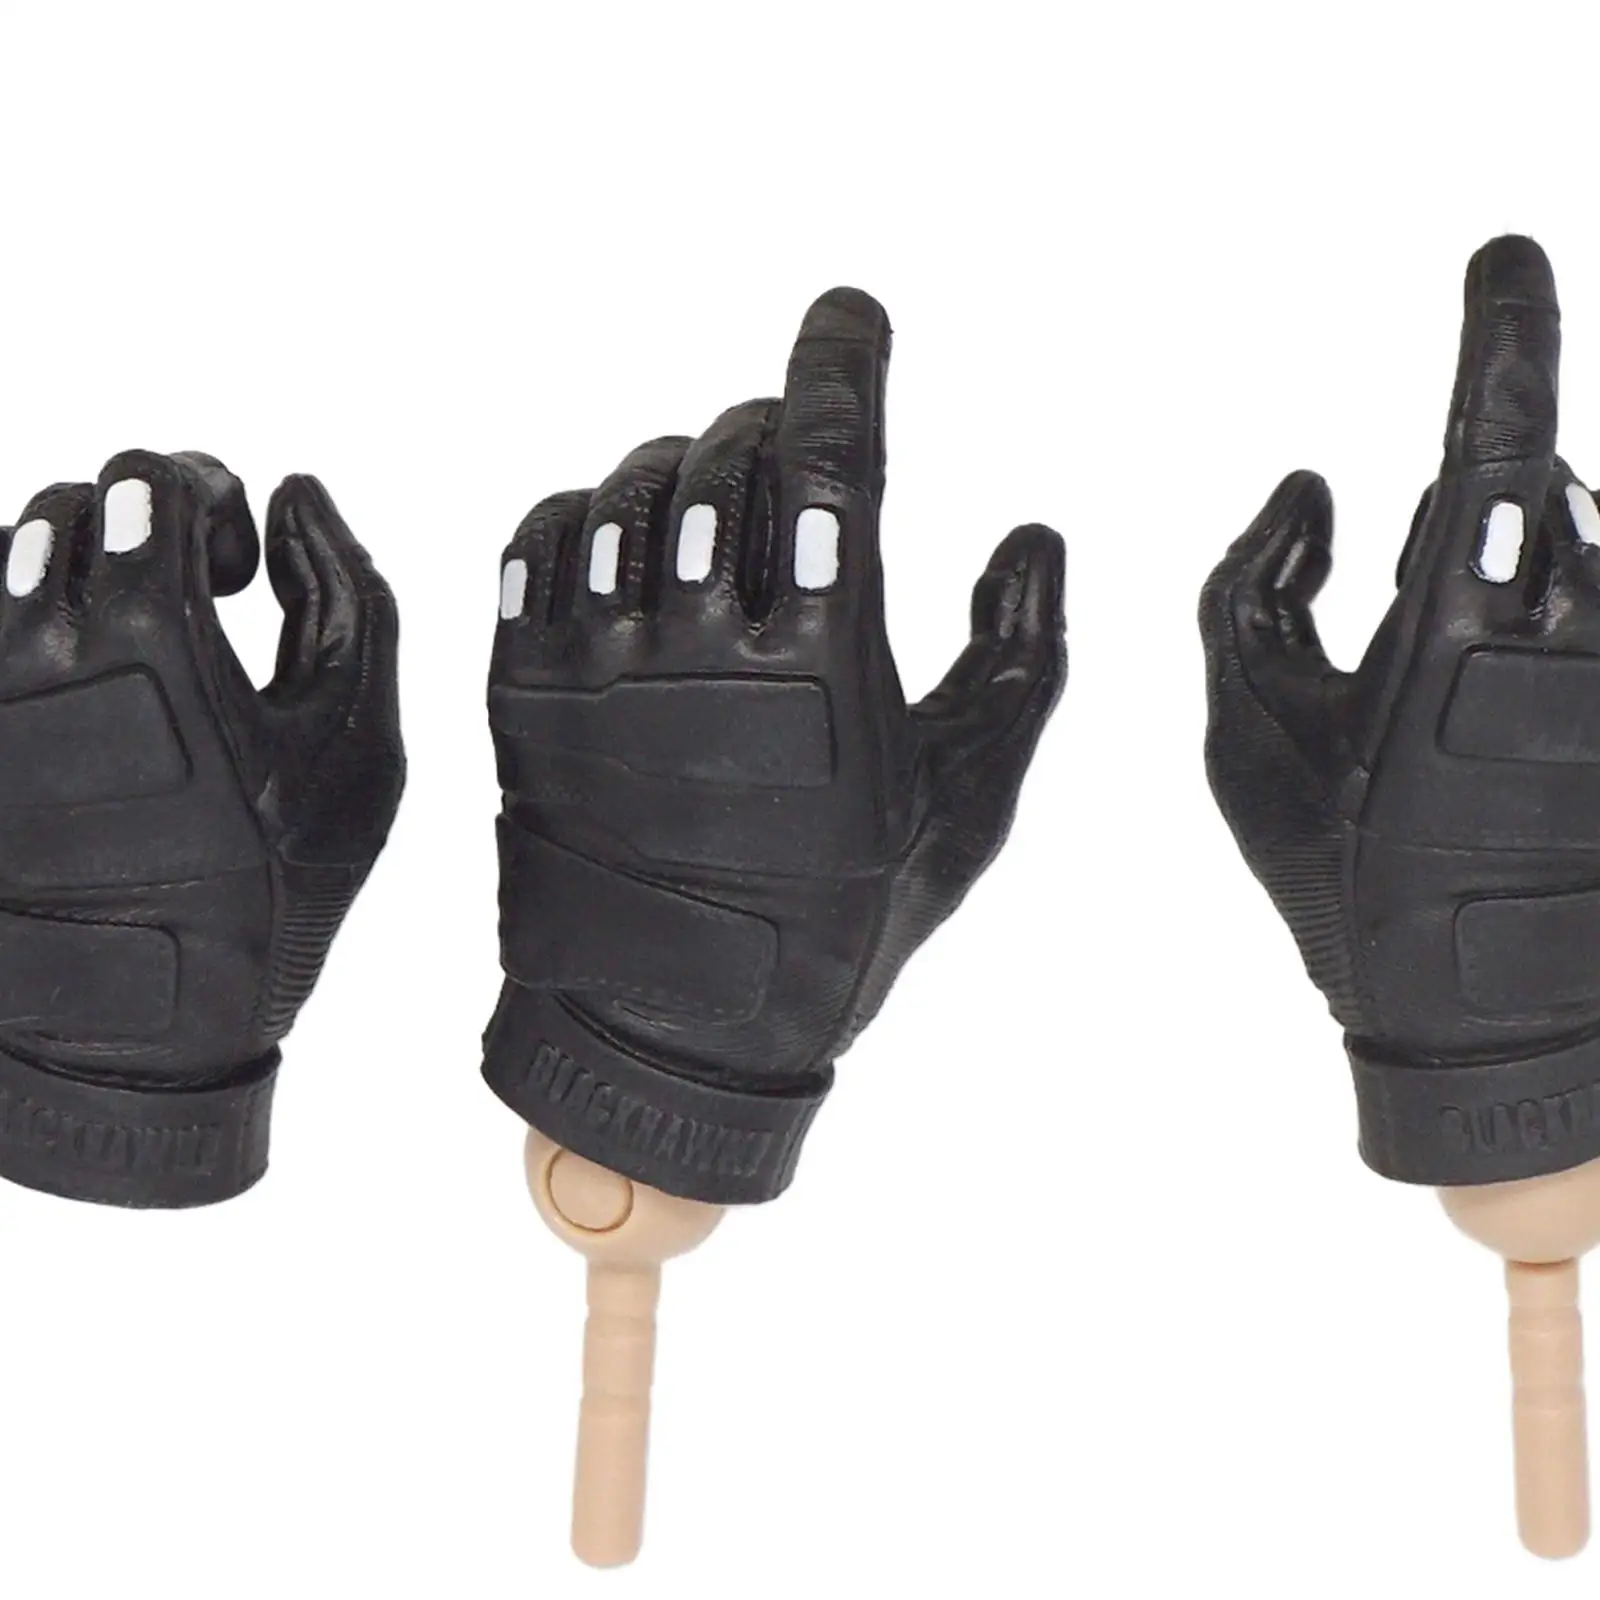 3x 1:6 Male Gloves Hands Doll Decor for 12inch Collectible Action Figures